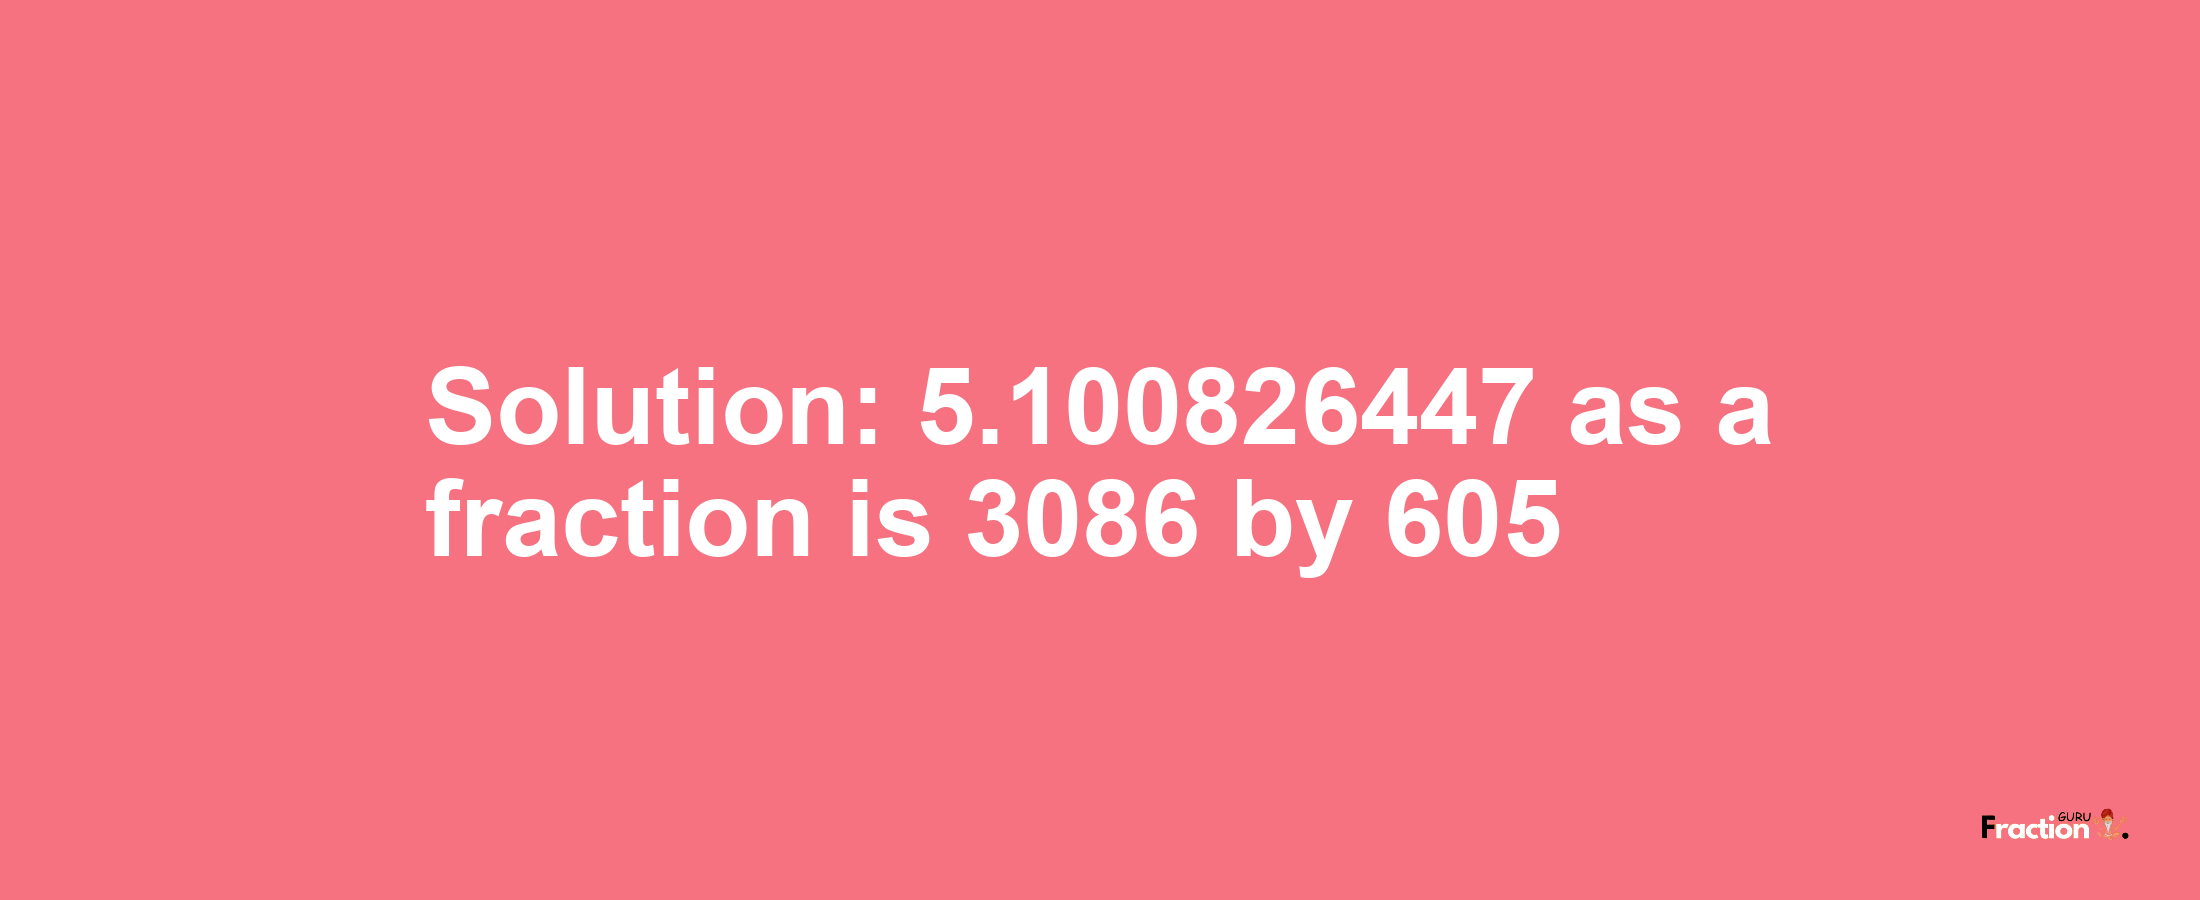 Solution:5.100826447 as a fraction is 3086/605